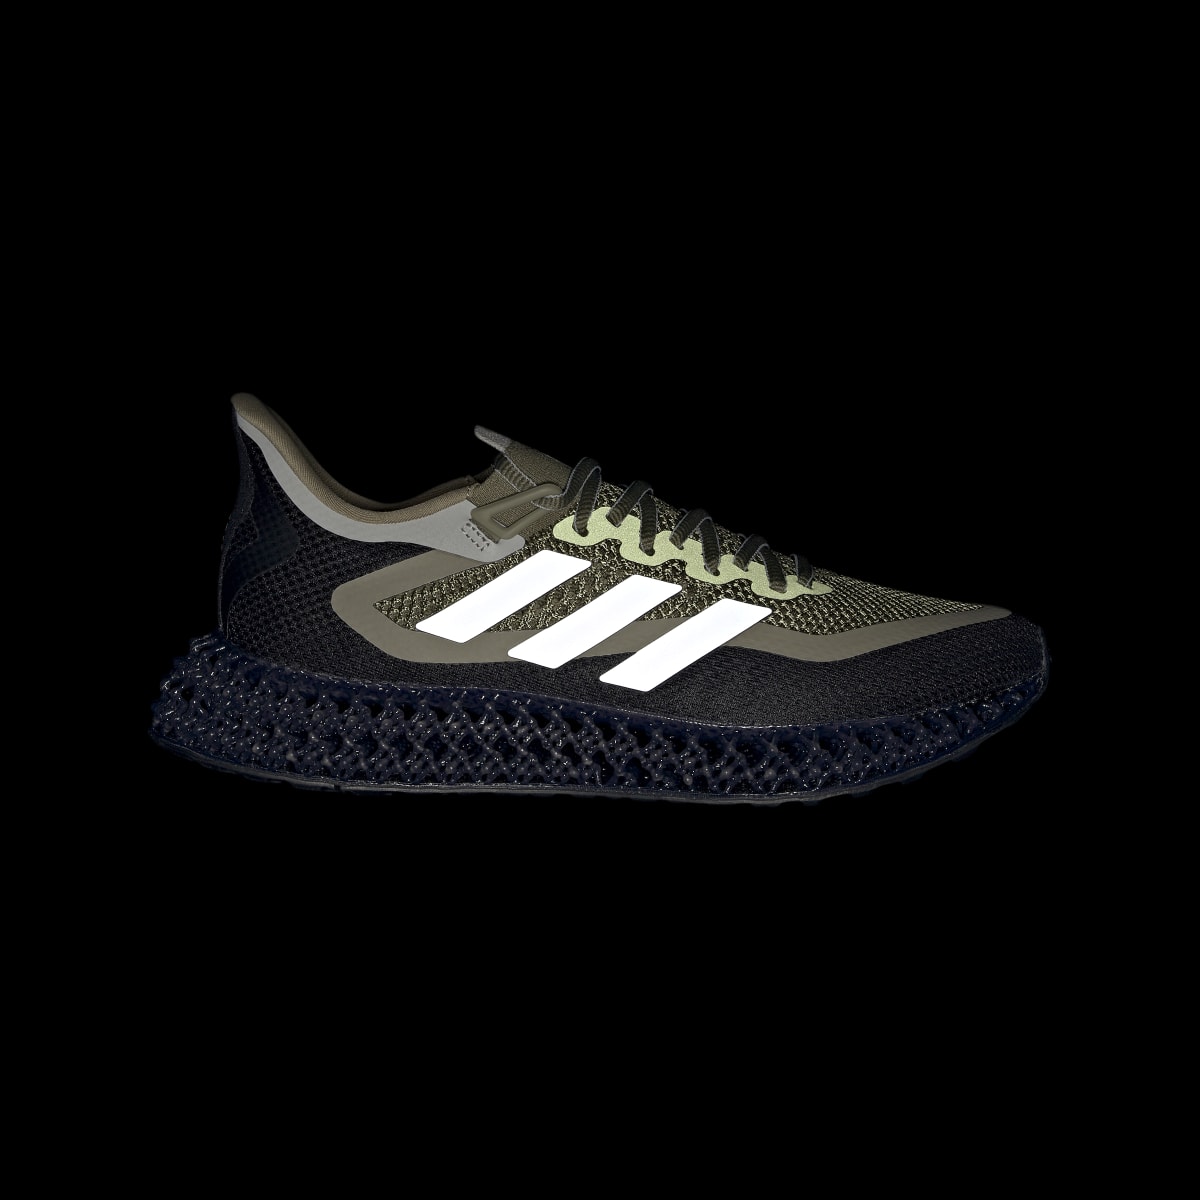 Adidas 4DFWD 2 Running Shoes. 5